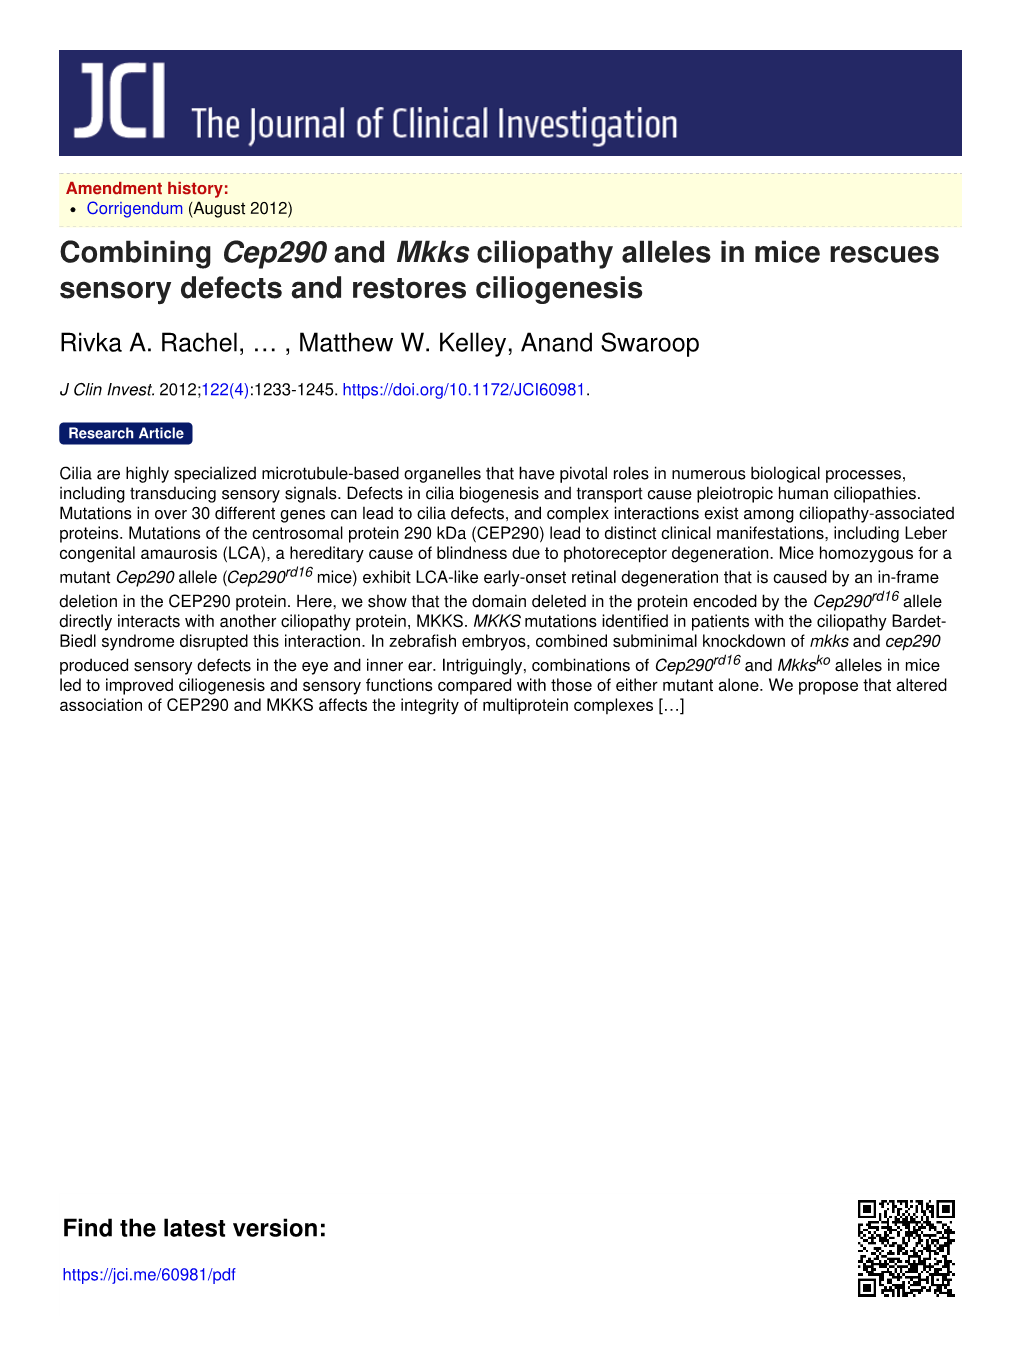 Combining Cep290 and Mkks Ciliopathy Alleles in Mice Rescues Sensory Defects and Restores Ciliogenesis